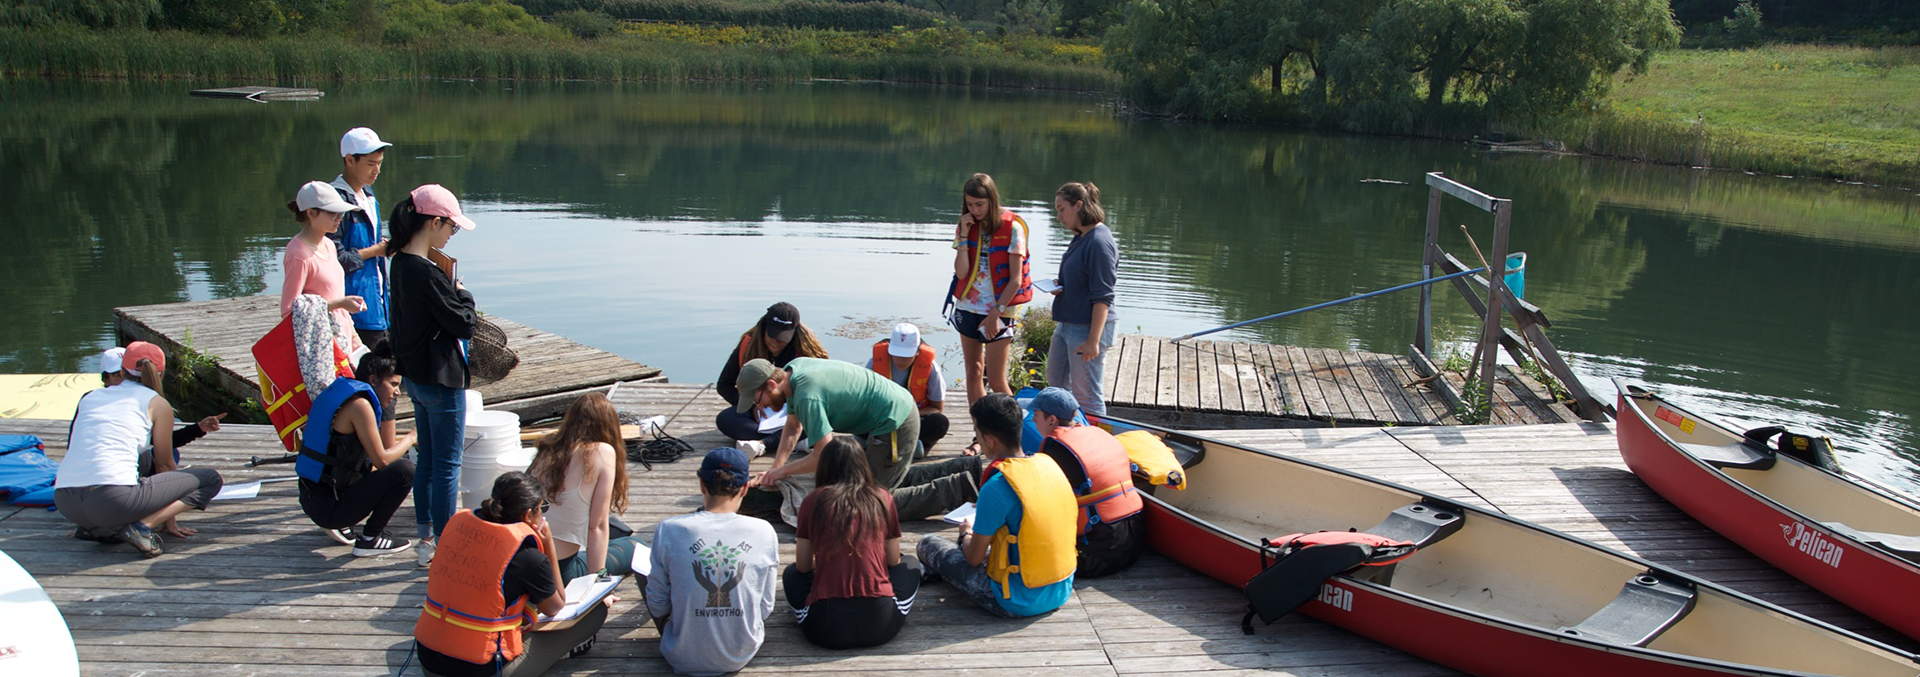 Trinity One students at the Koffler Centre - they are on the dock looking at invertebrates